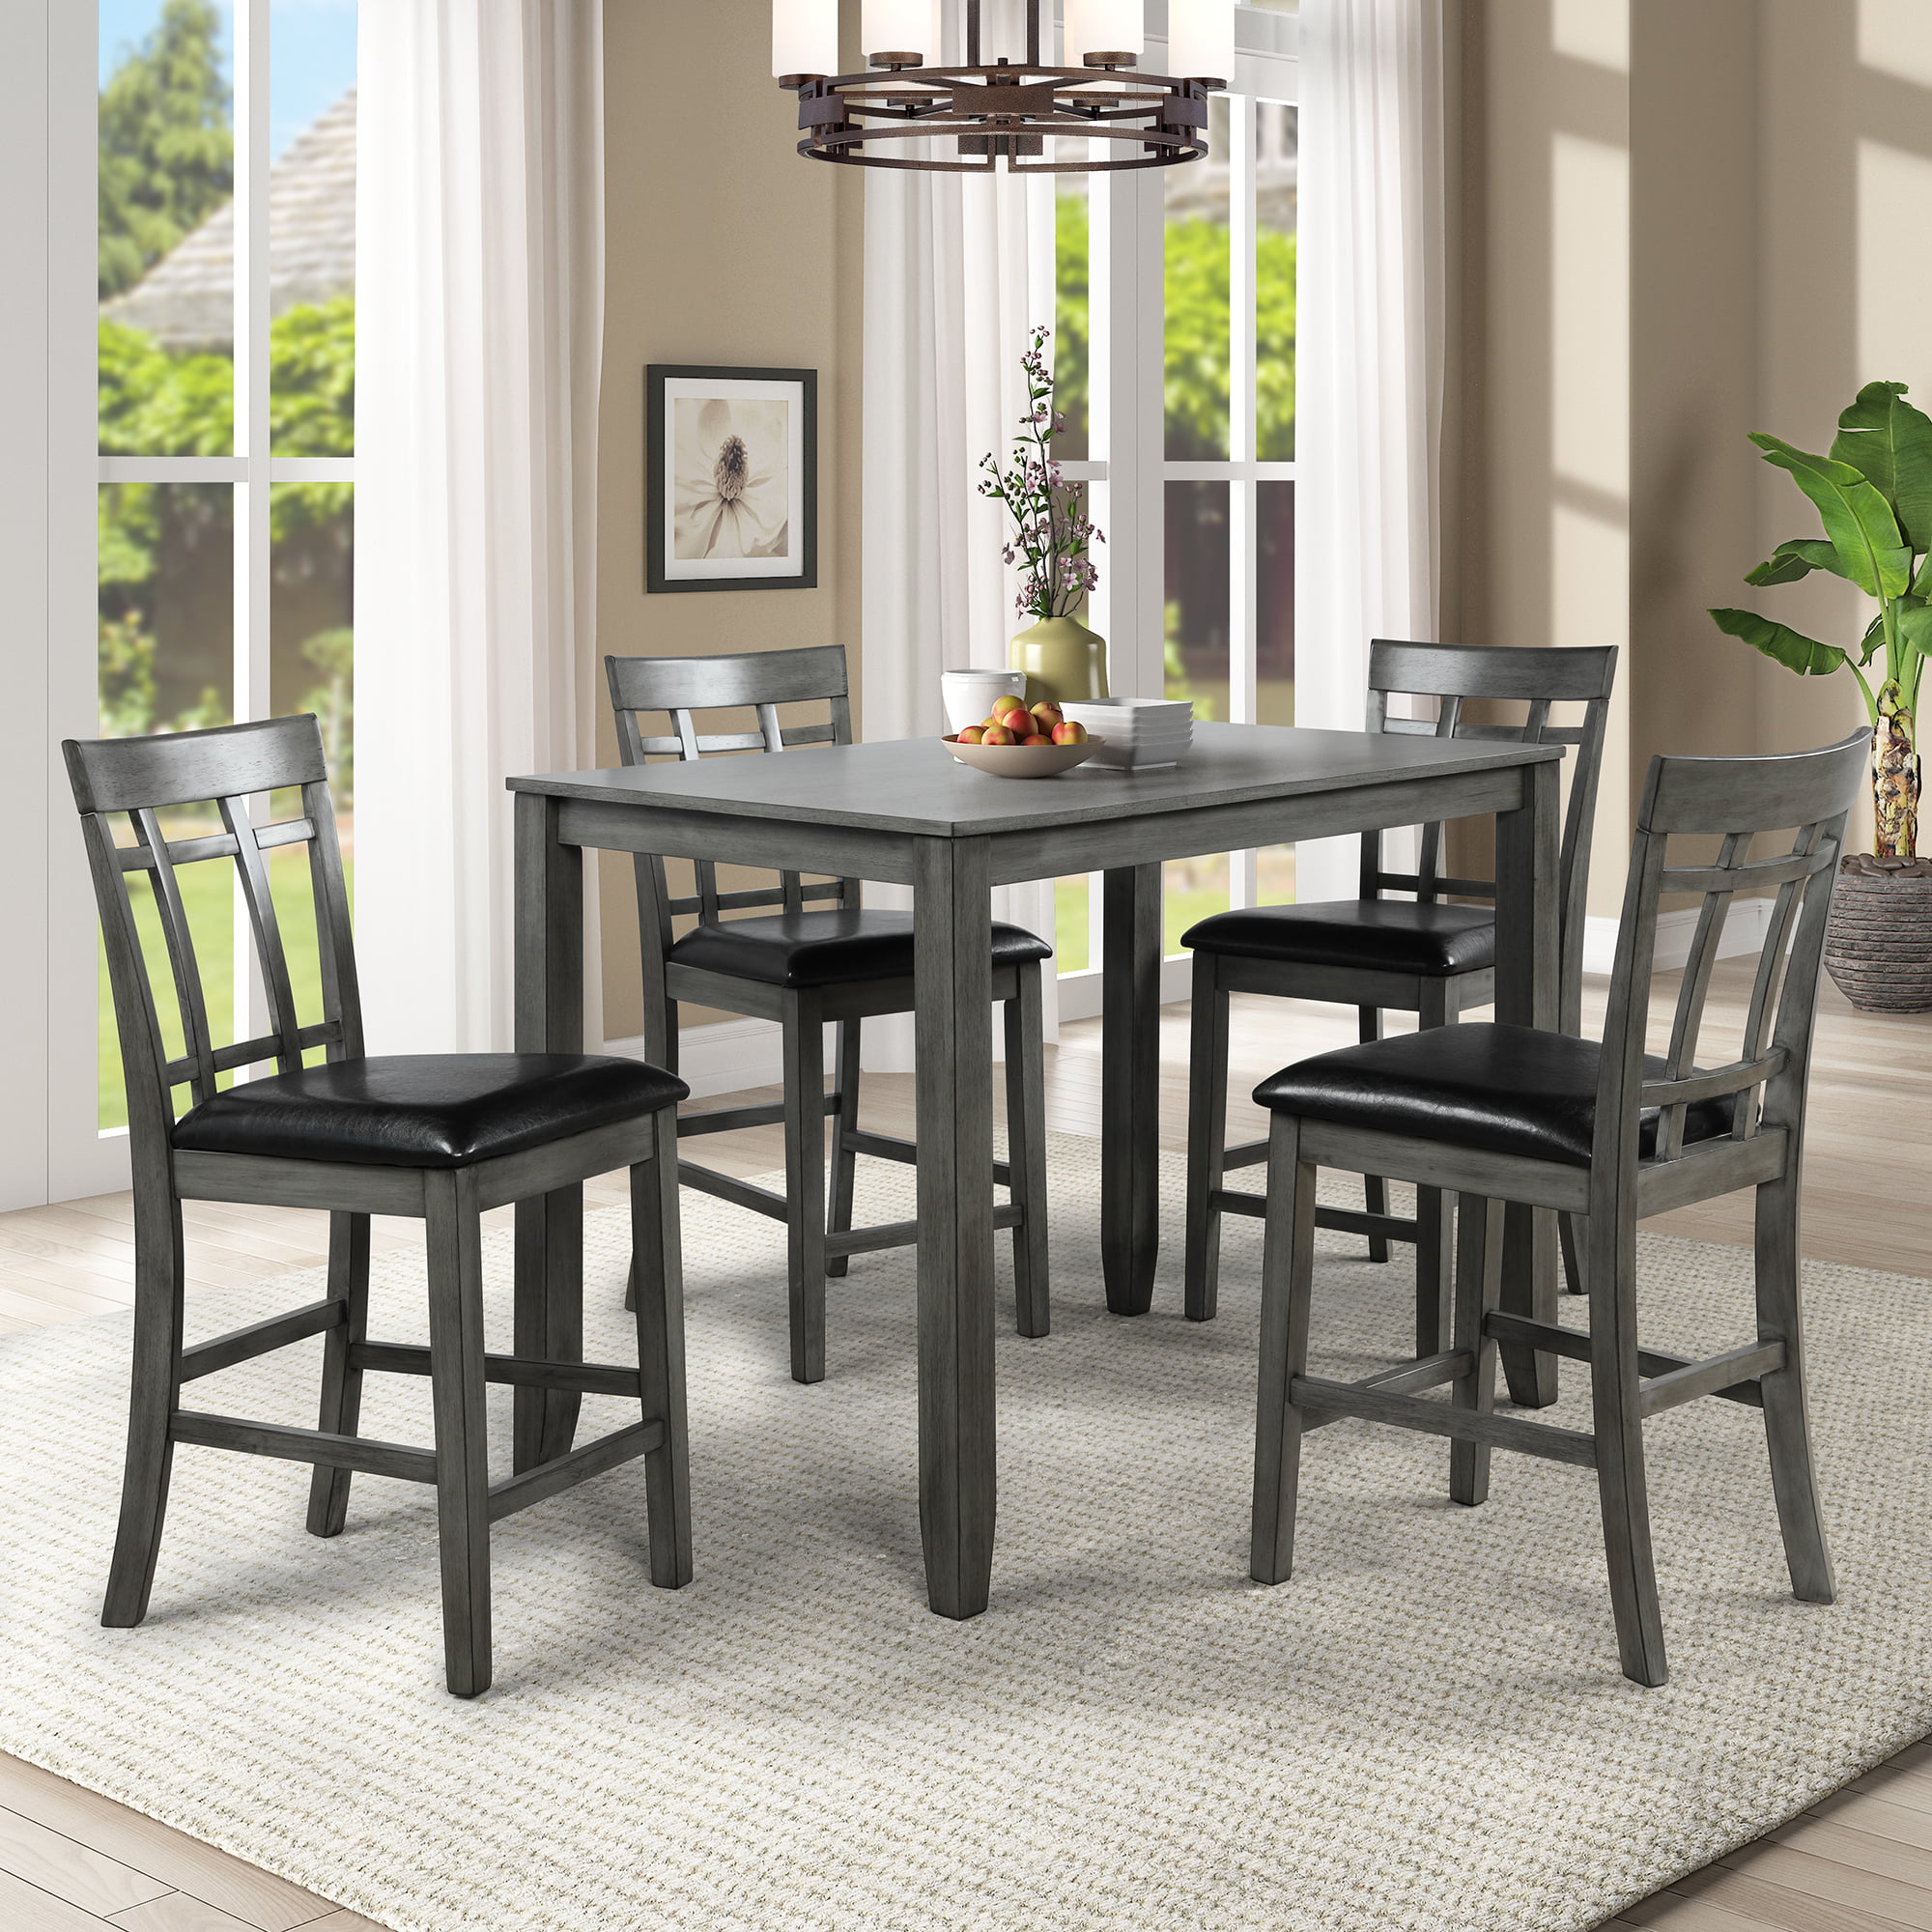 Dining Table Set for 4, BTMWAY 5Piece Solid Wood Kitchen Table Set